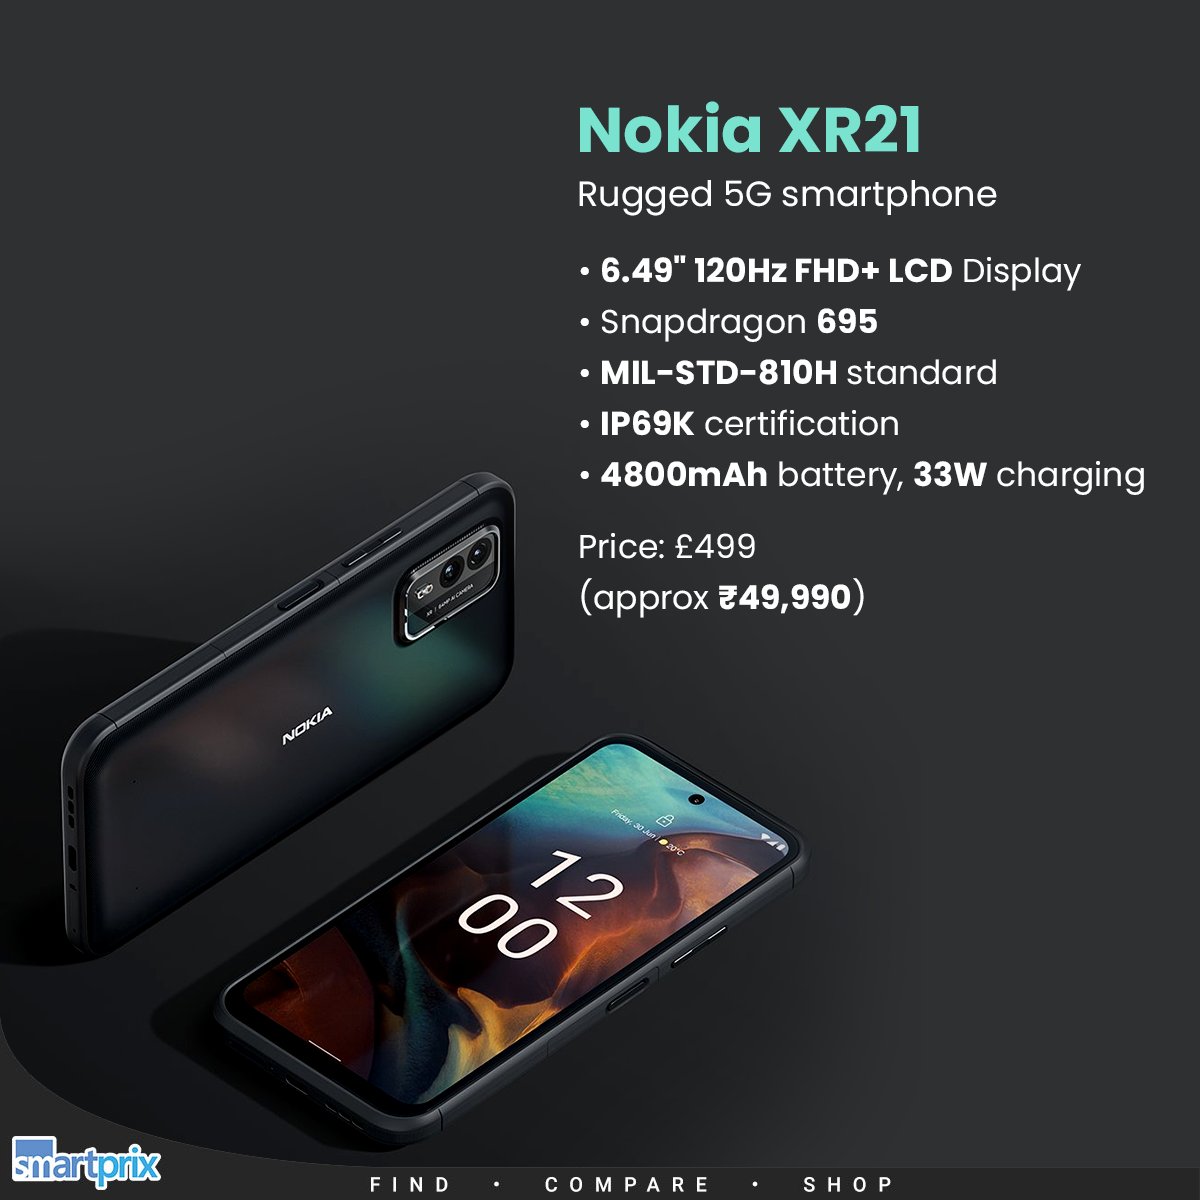 Nokia XR21: The toughest smartphone of 2023 built to survive anything.

#Nokia #NokiaXR21 #Toughest